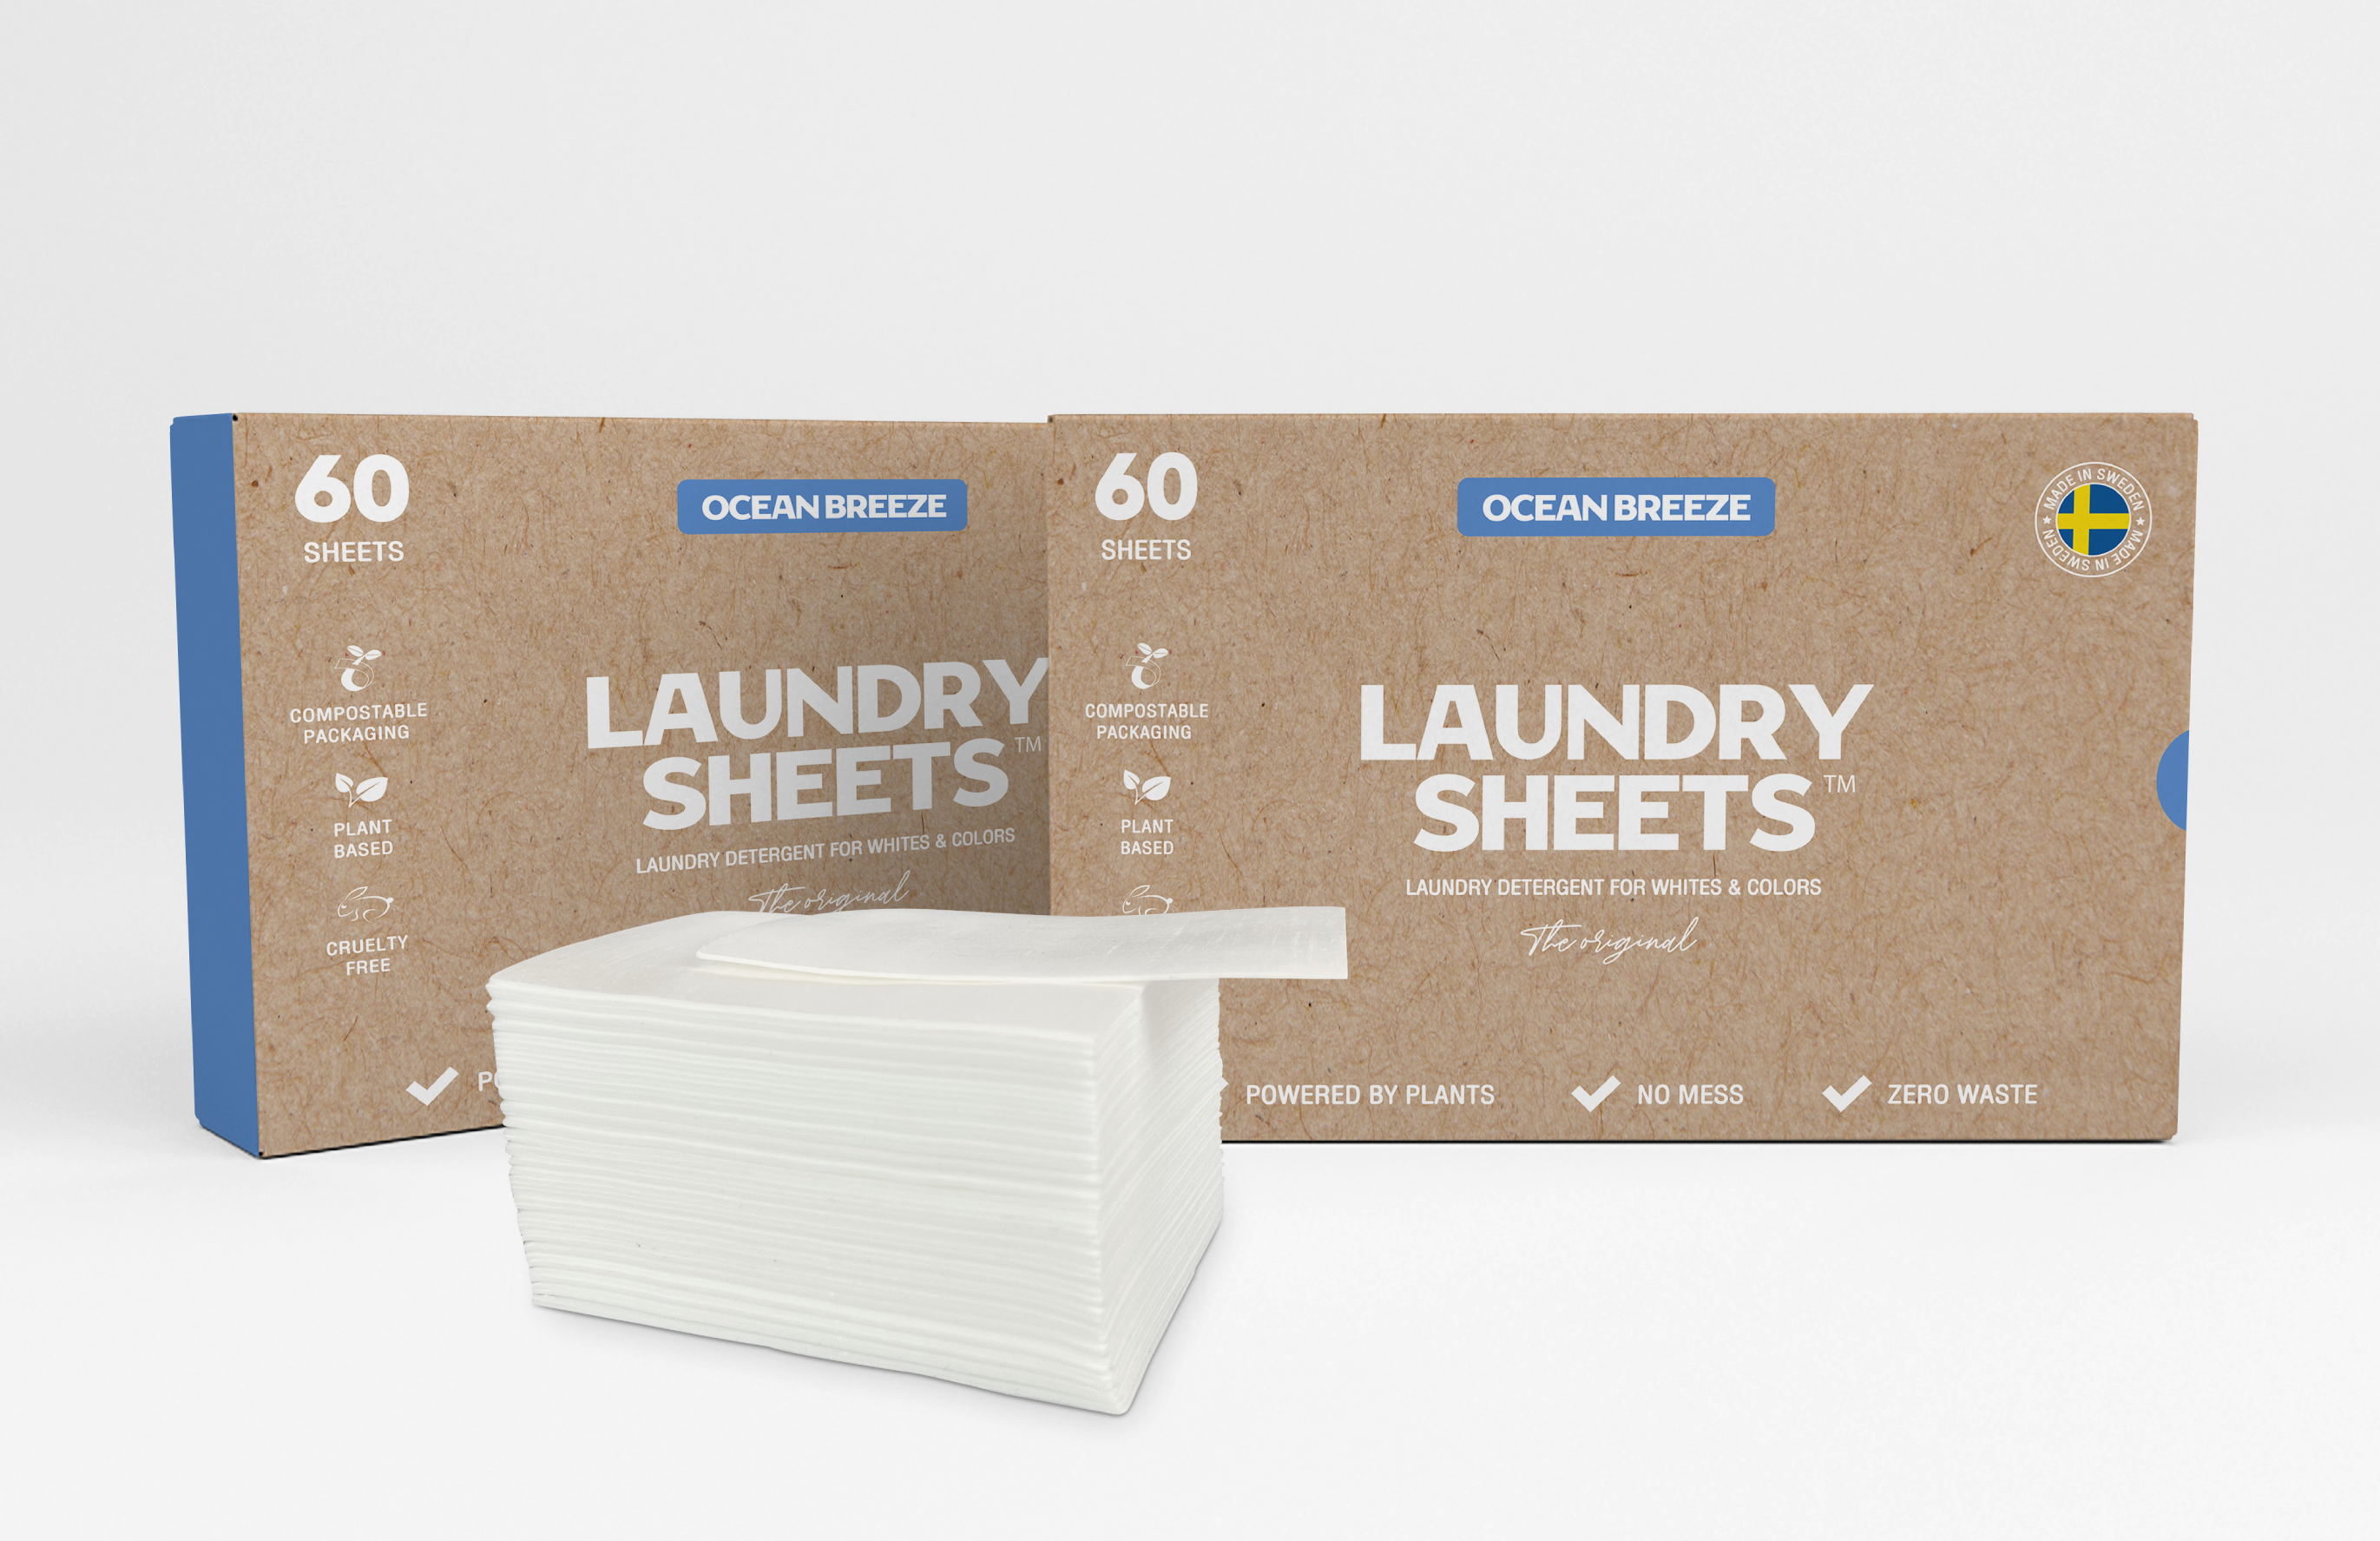 Answers to your questions – LAUNDRY SHEETS